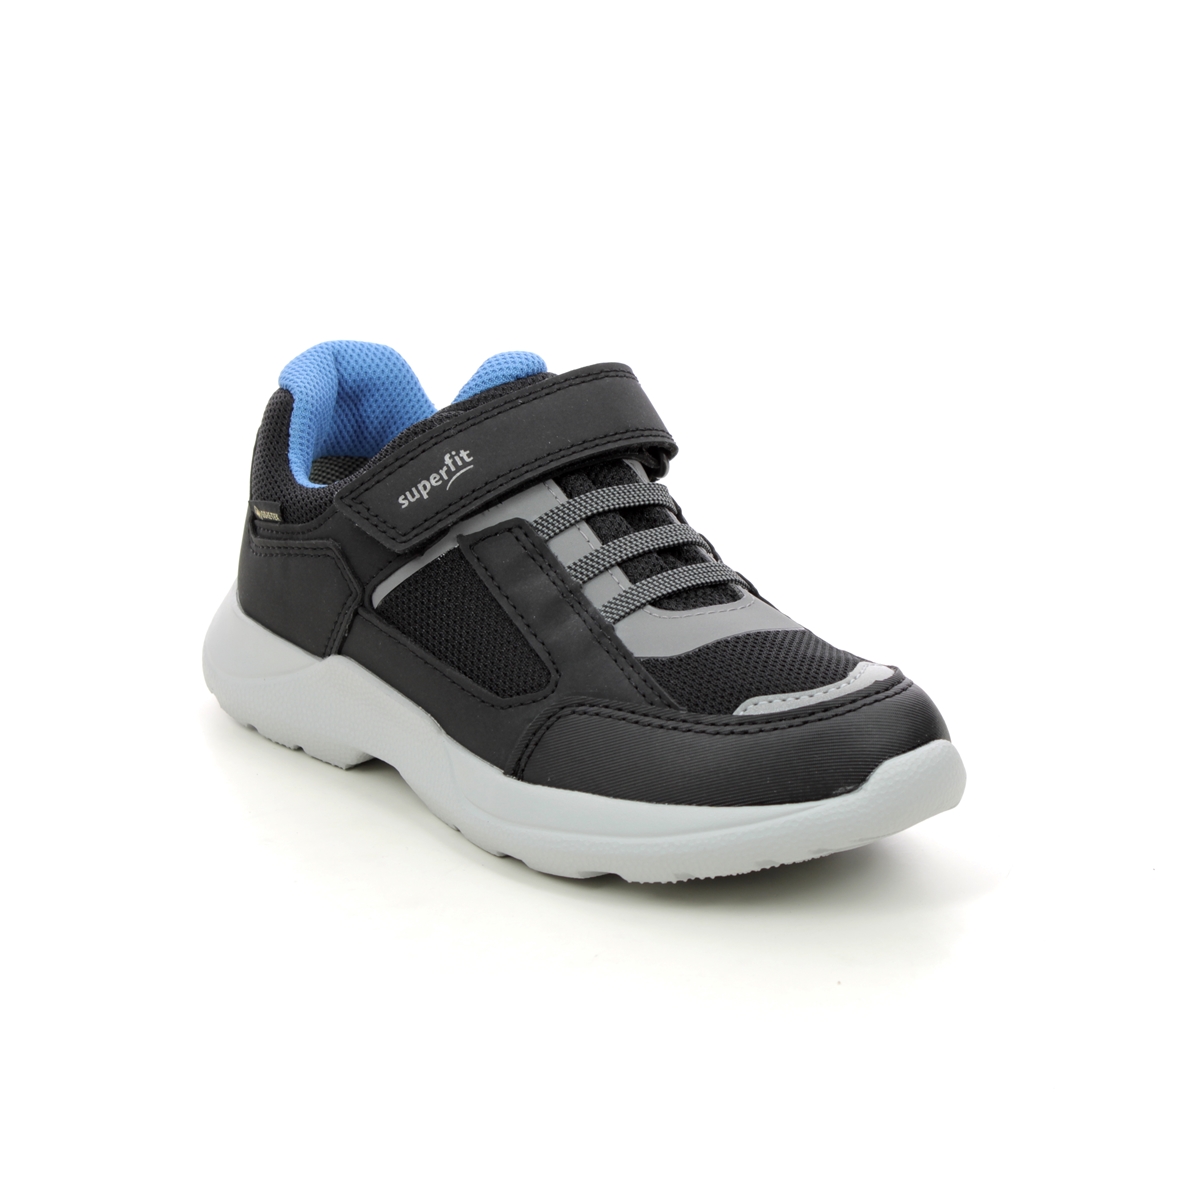 Superfit Rush Jnr B Gtx Black grey Kids trainers 1006225-0000 in a Plain Man-made in Size 35